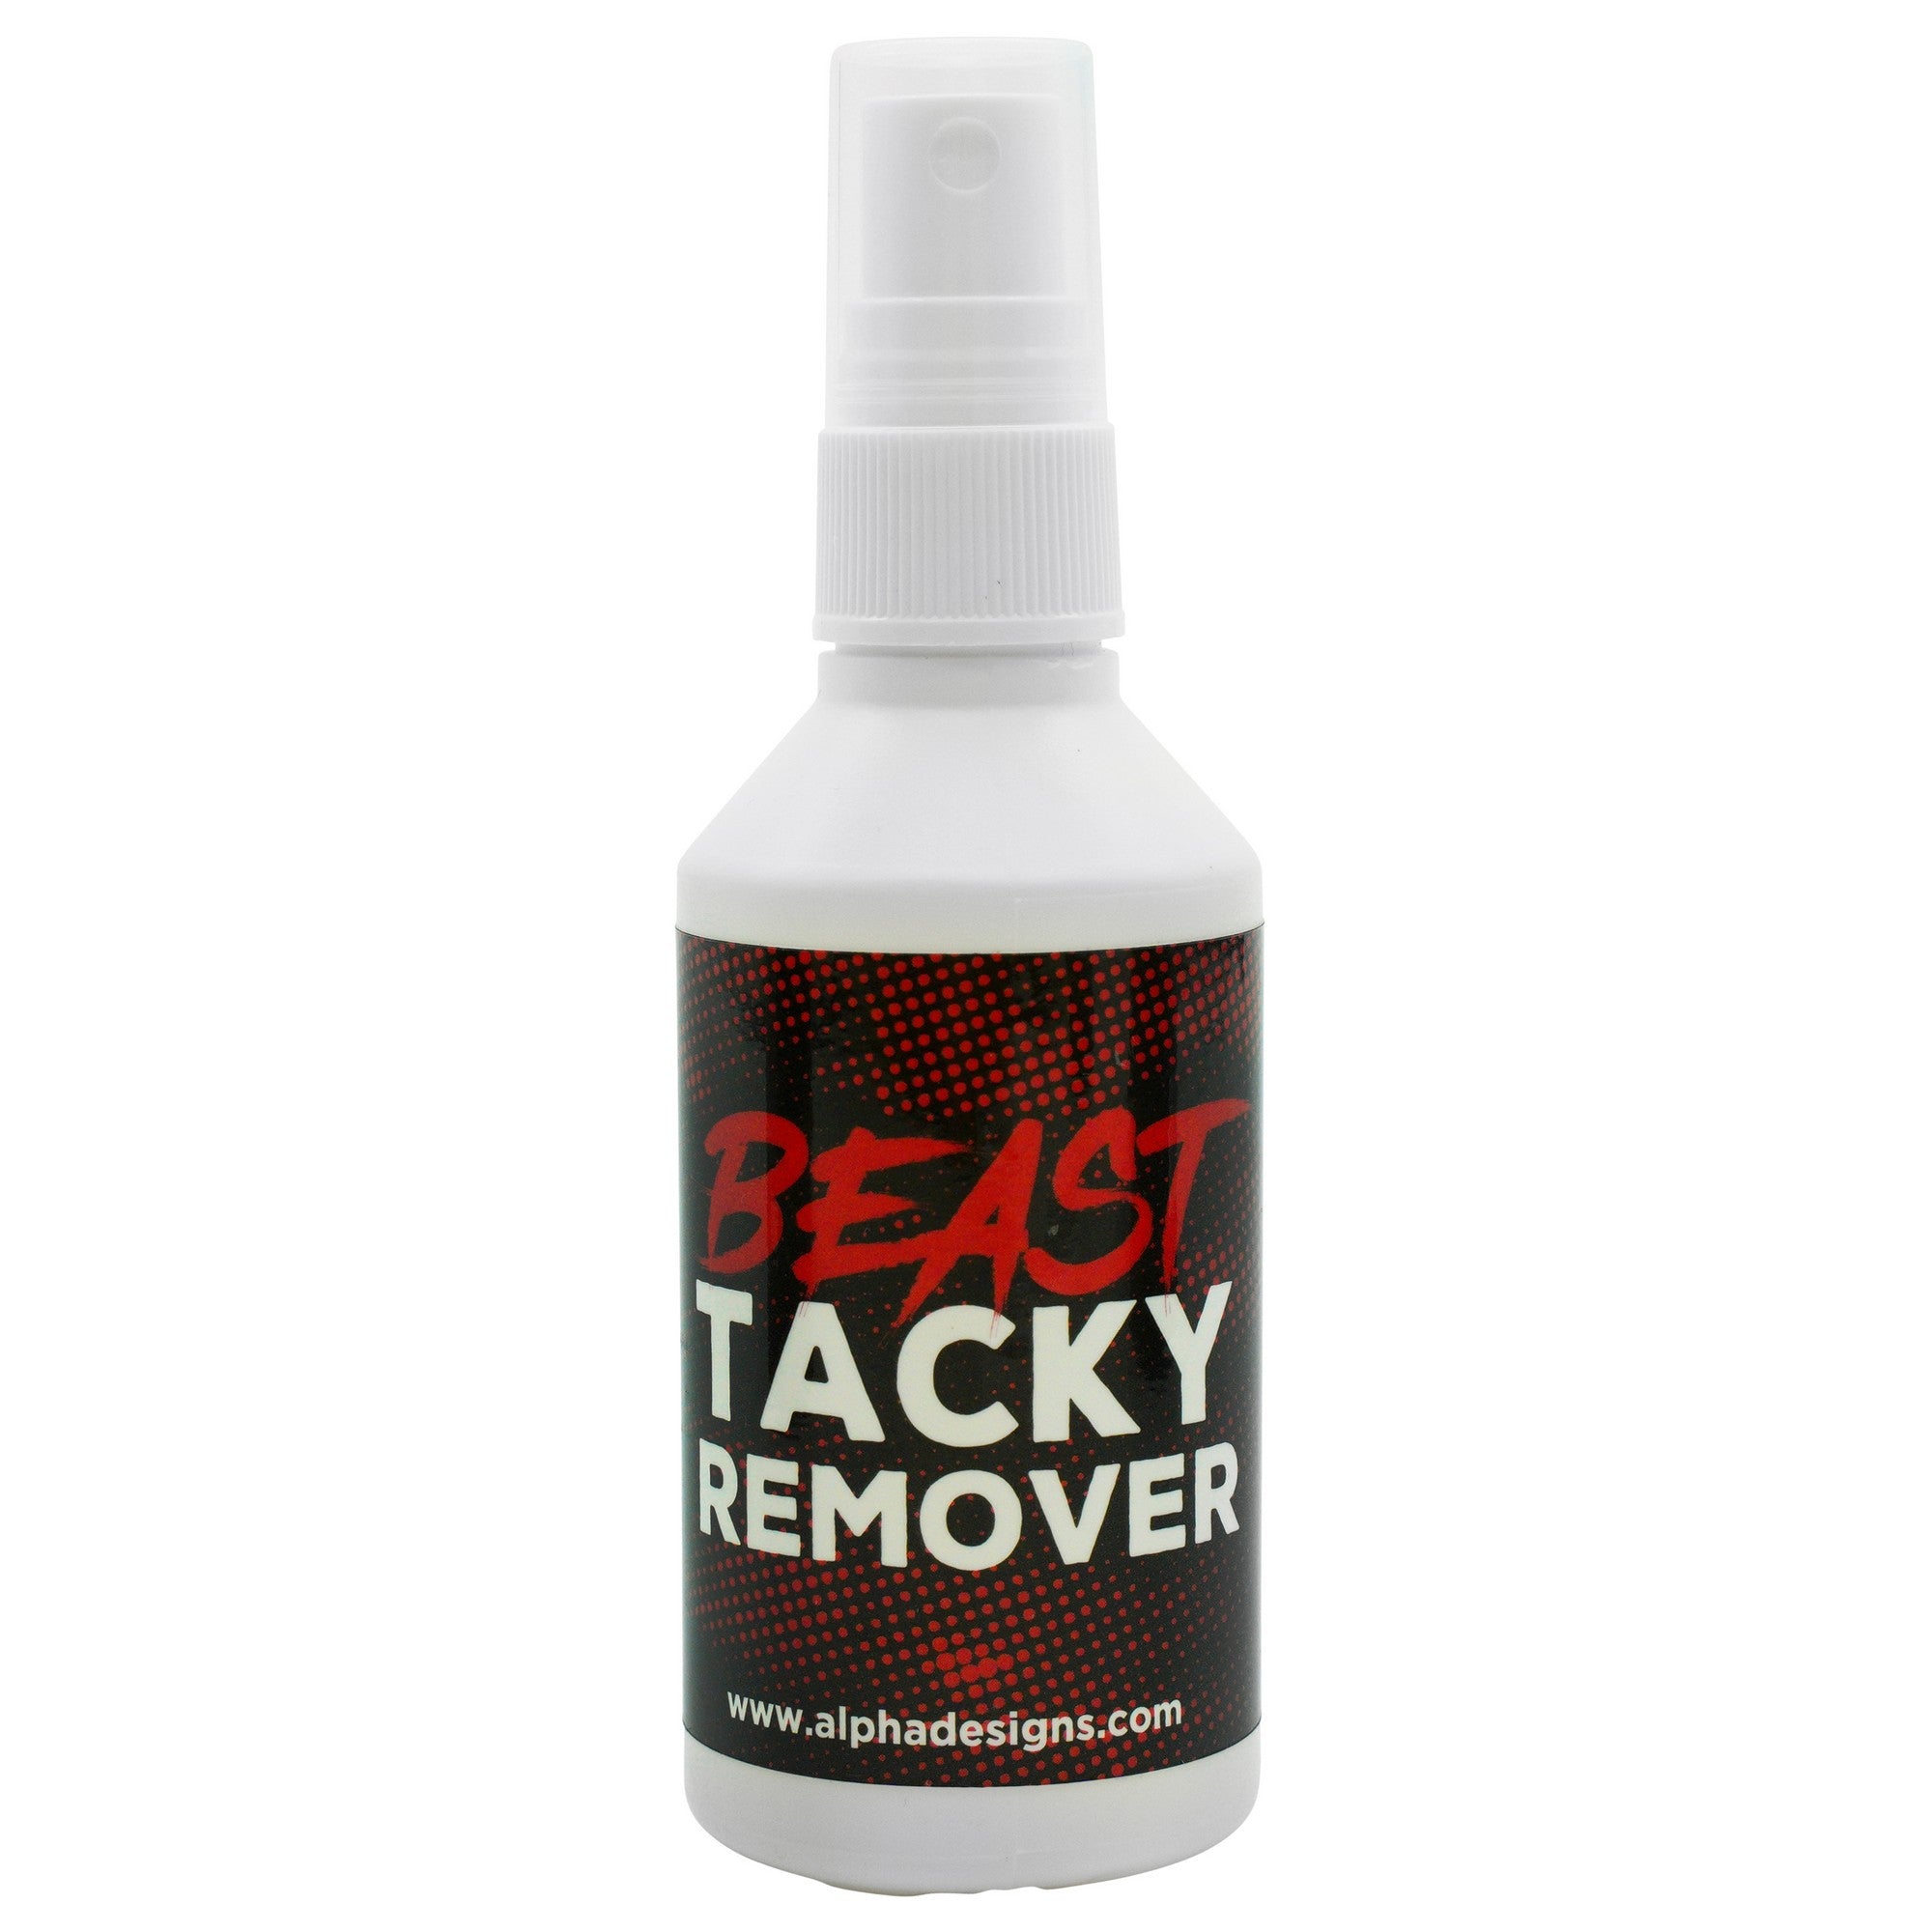 beast tacky remover